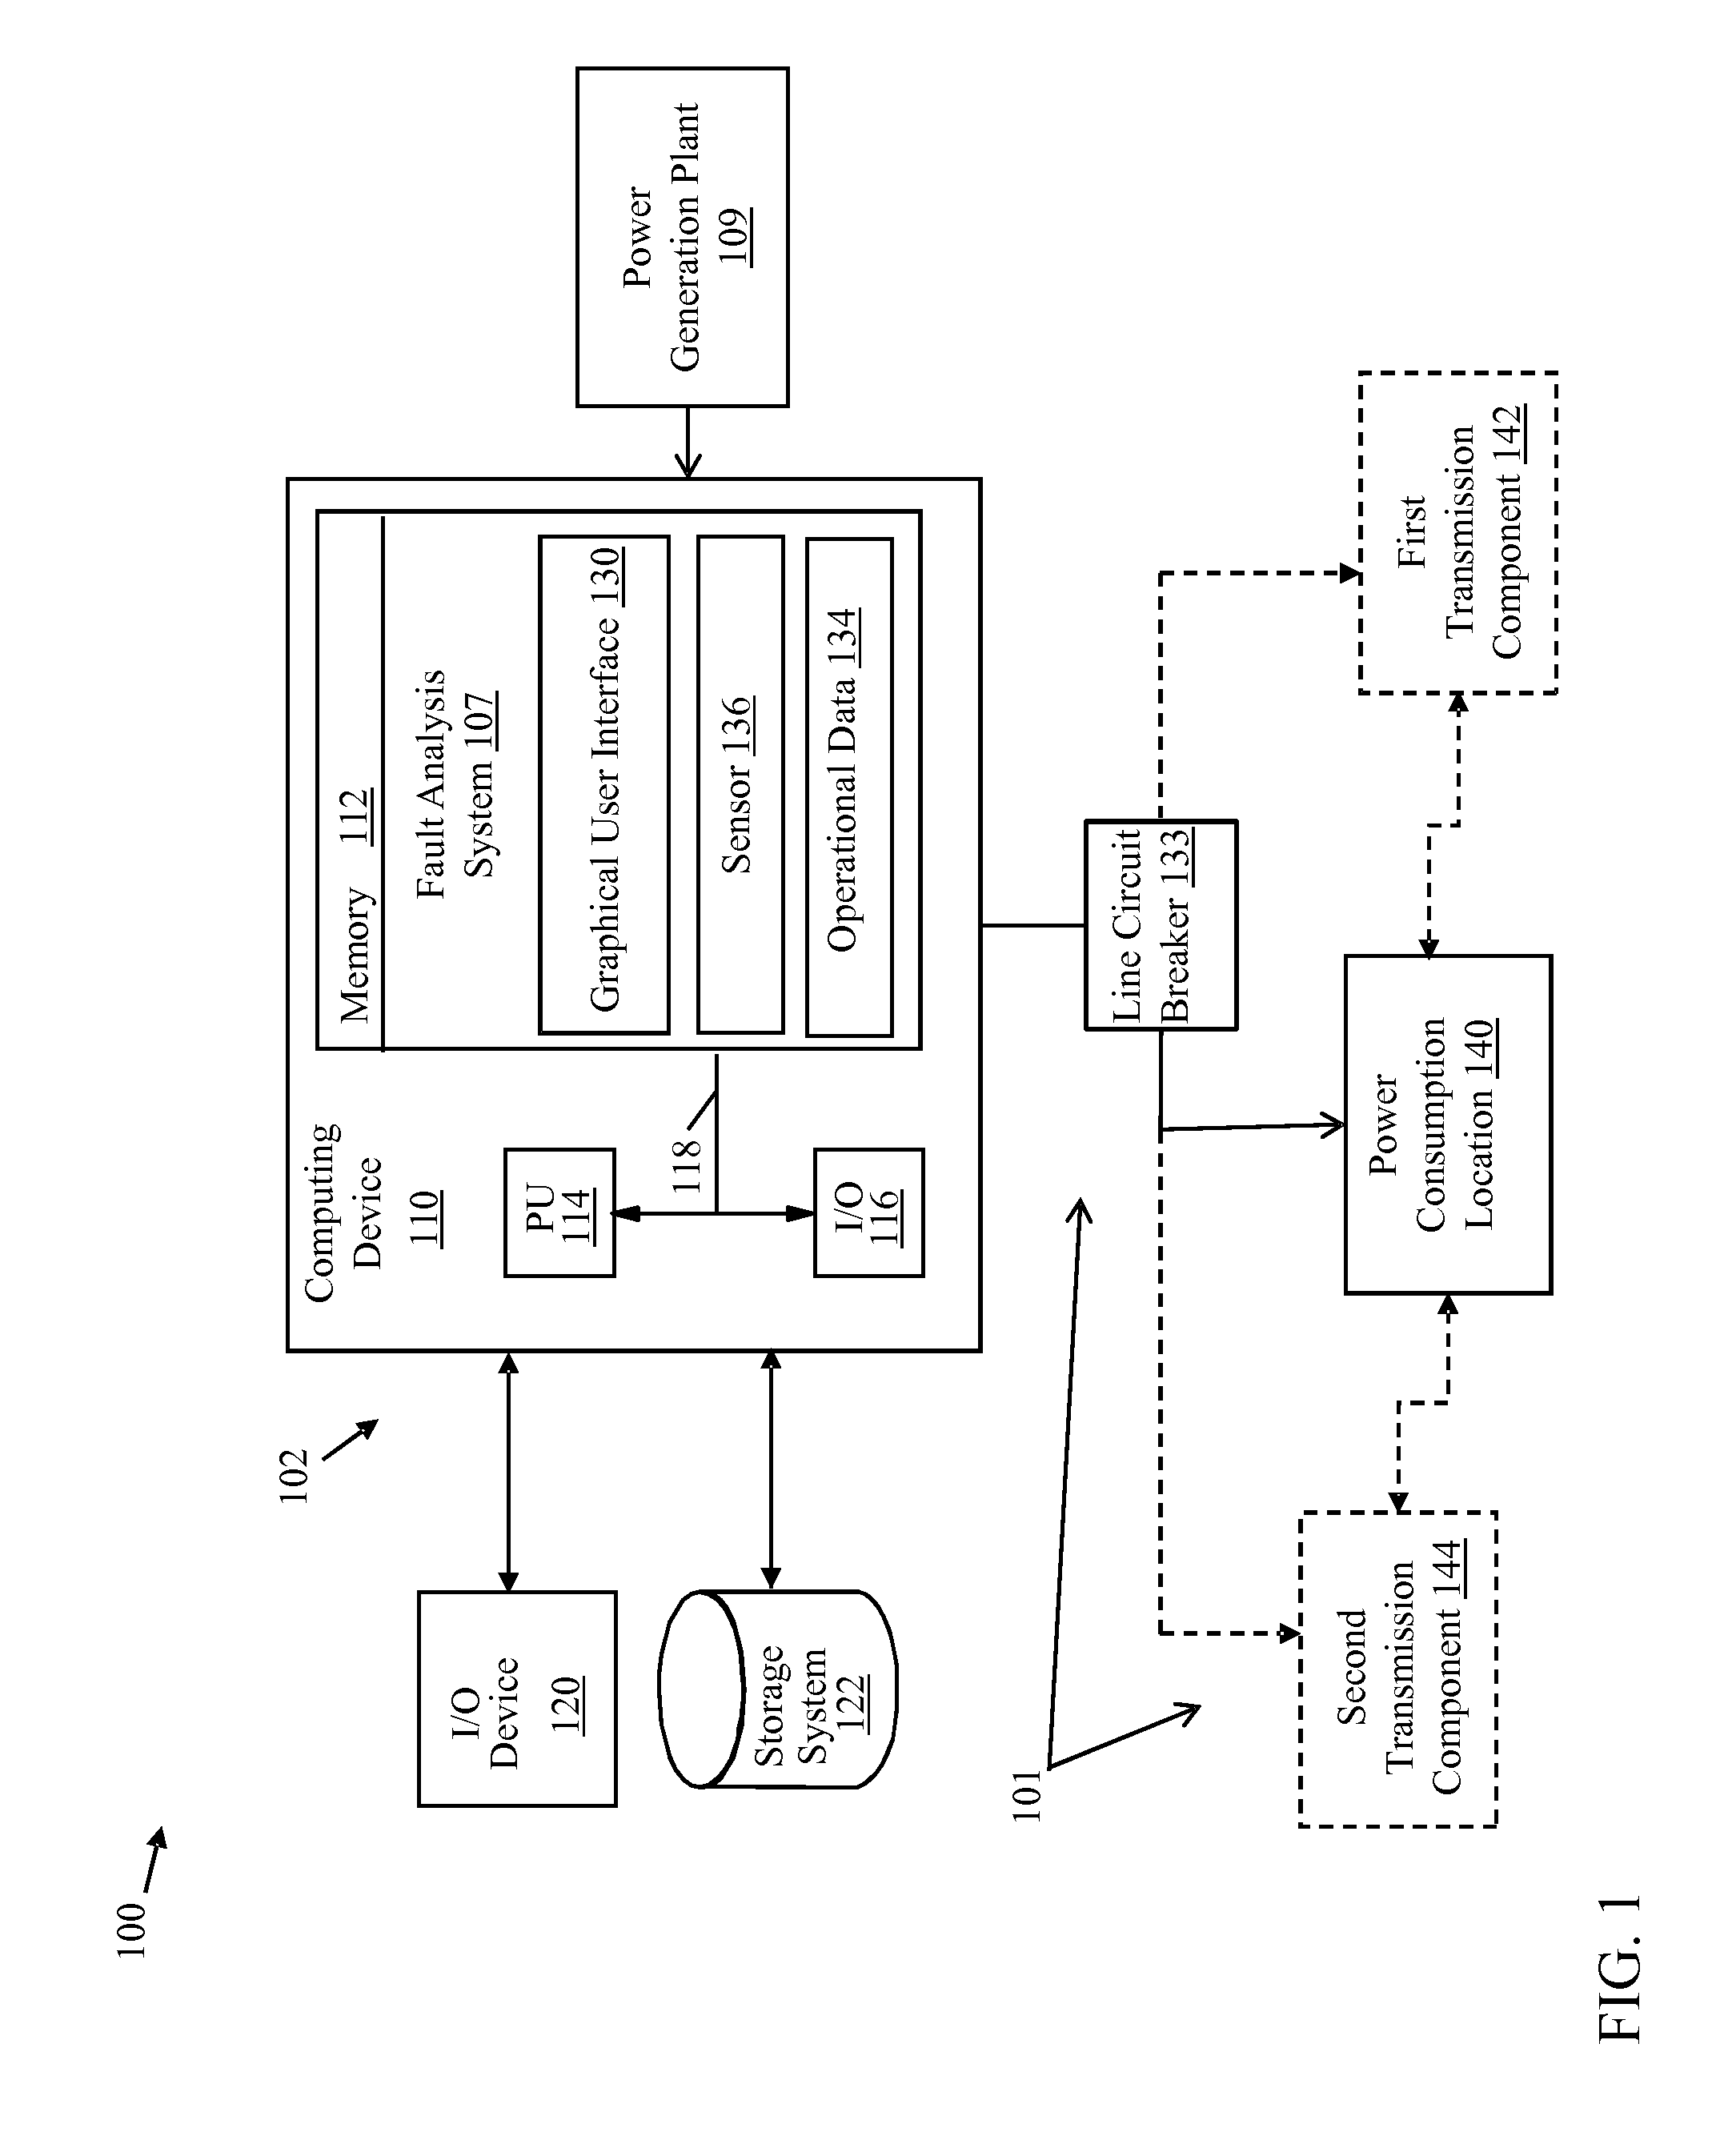 Power transmission fault analysis system and related method